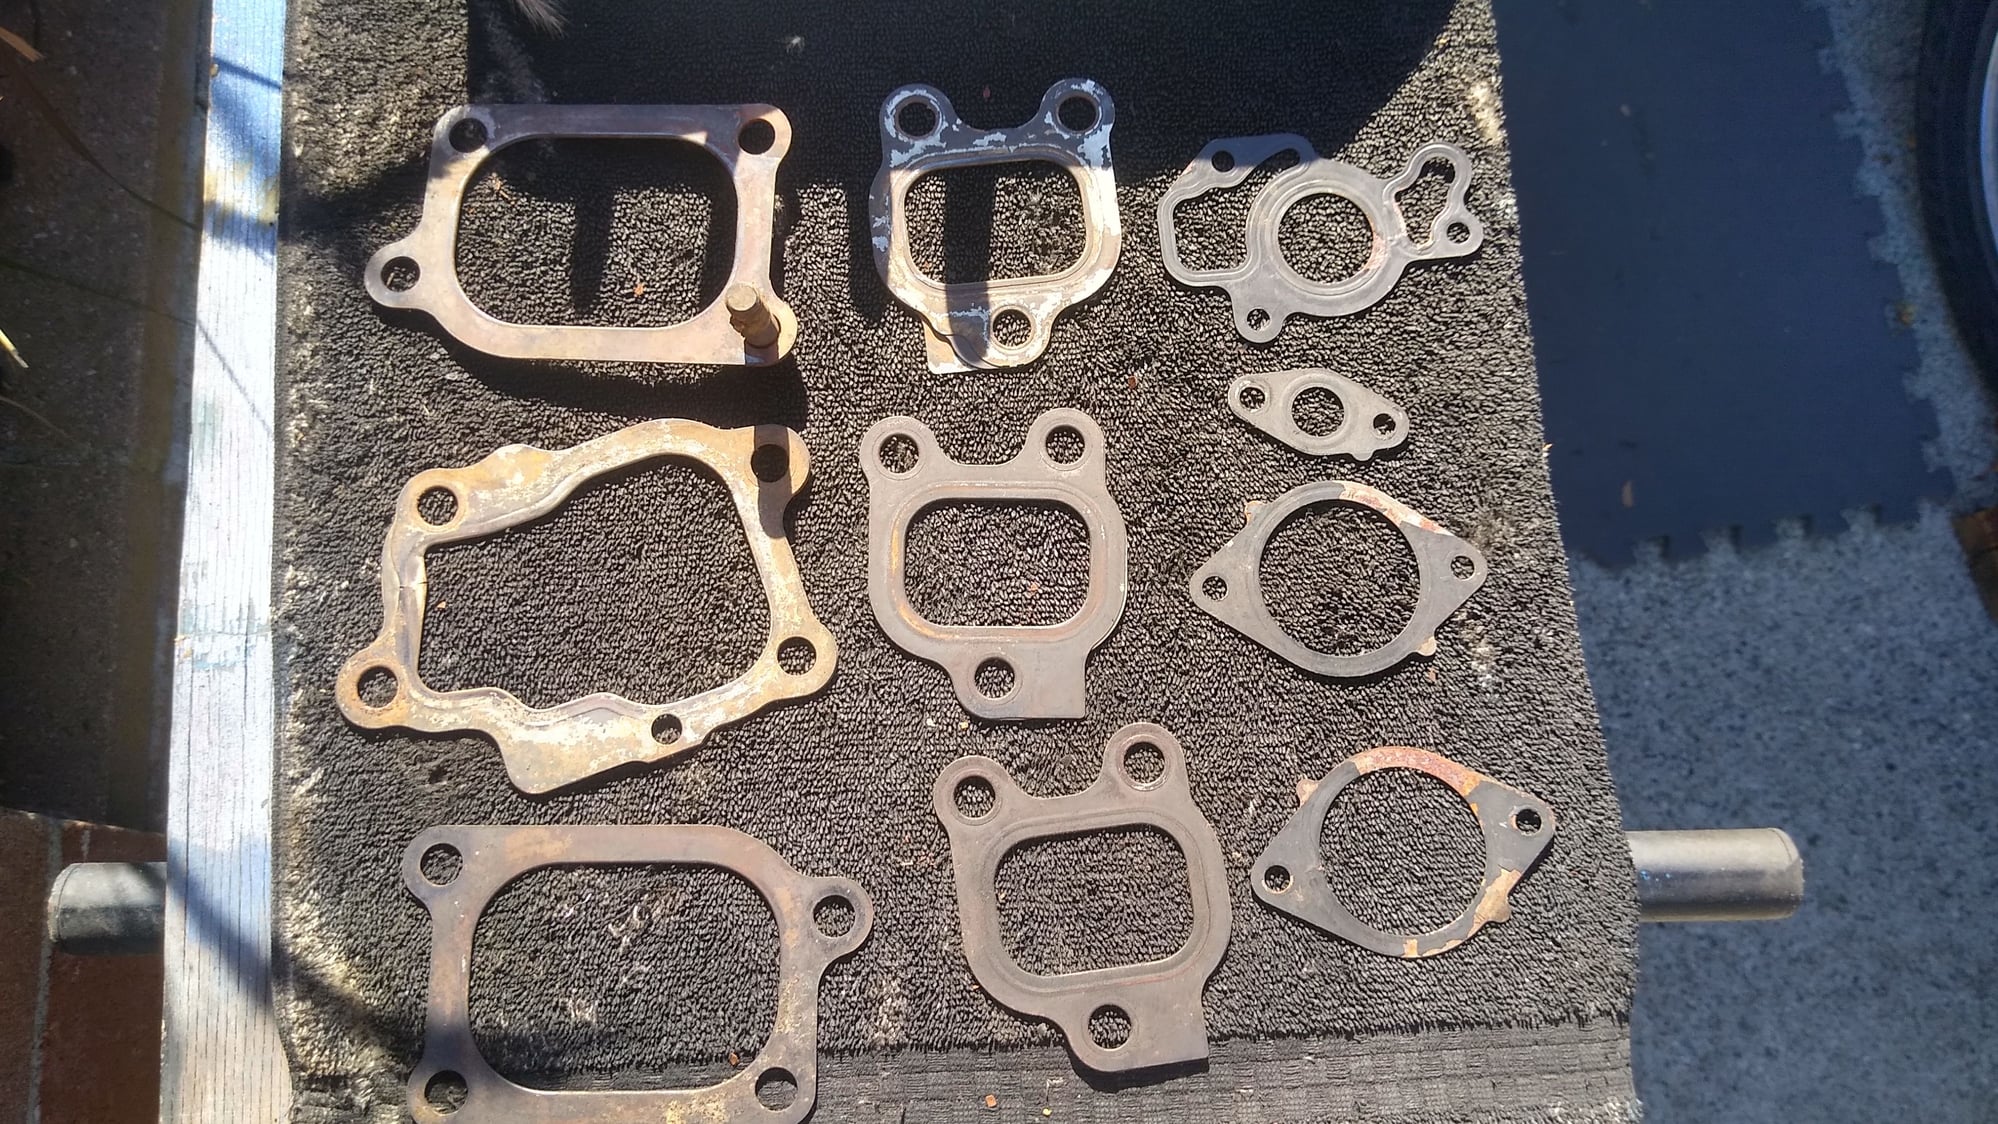 Miscellaneous - FD - OEM Various Gaskets - Used - 1993 to 1995 Mazda RX-7 - San Jose, CA 95121, United States